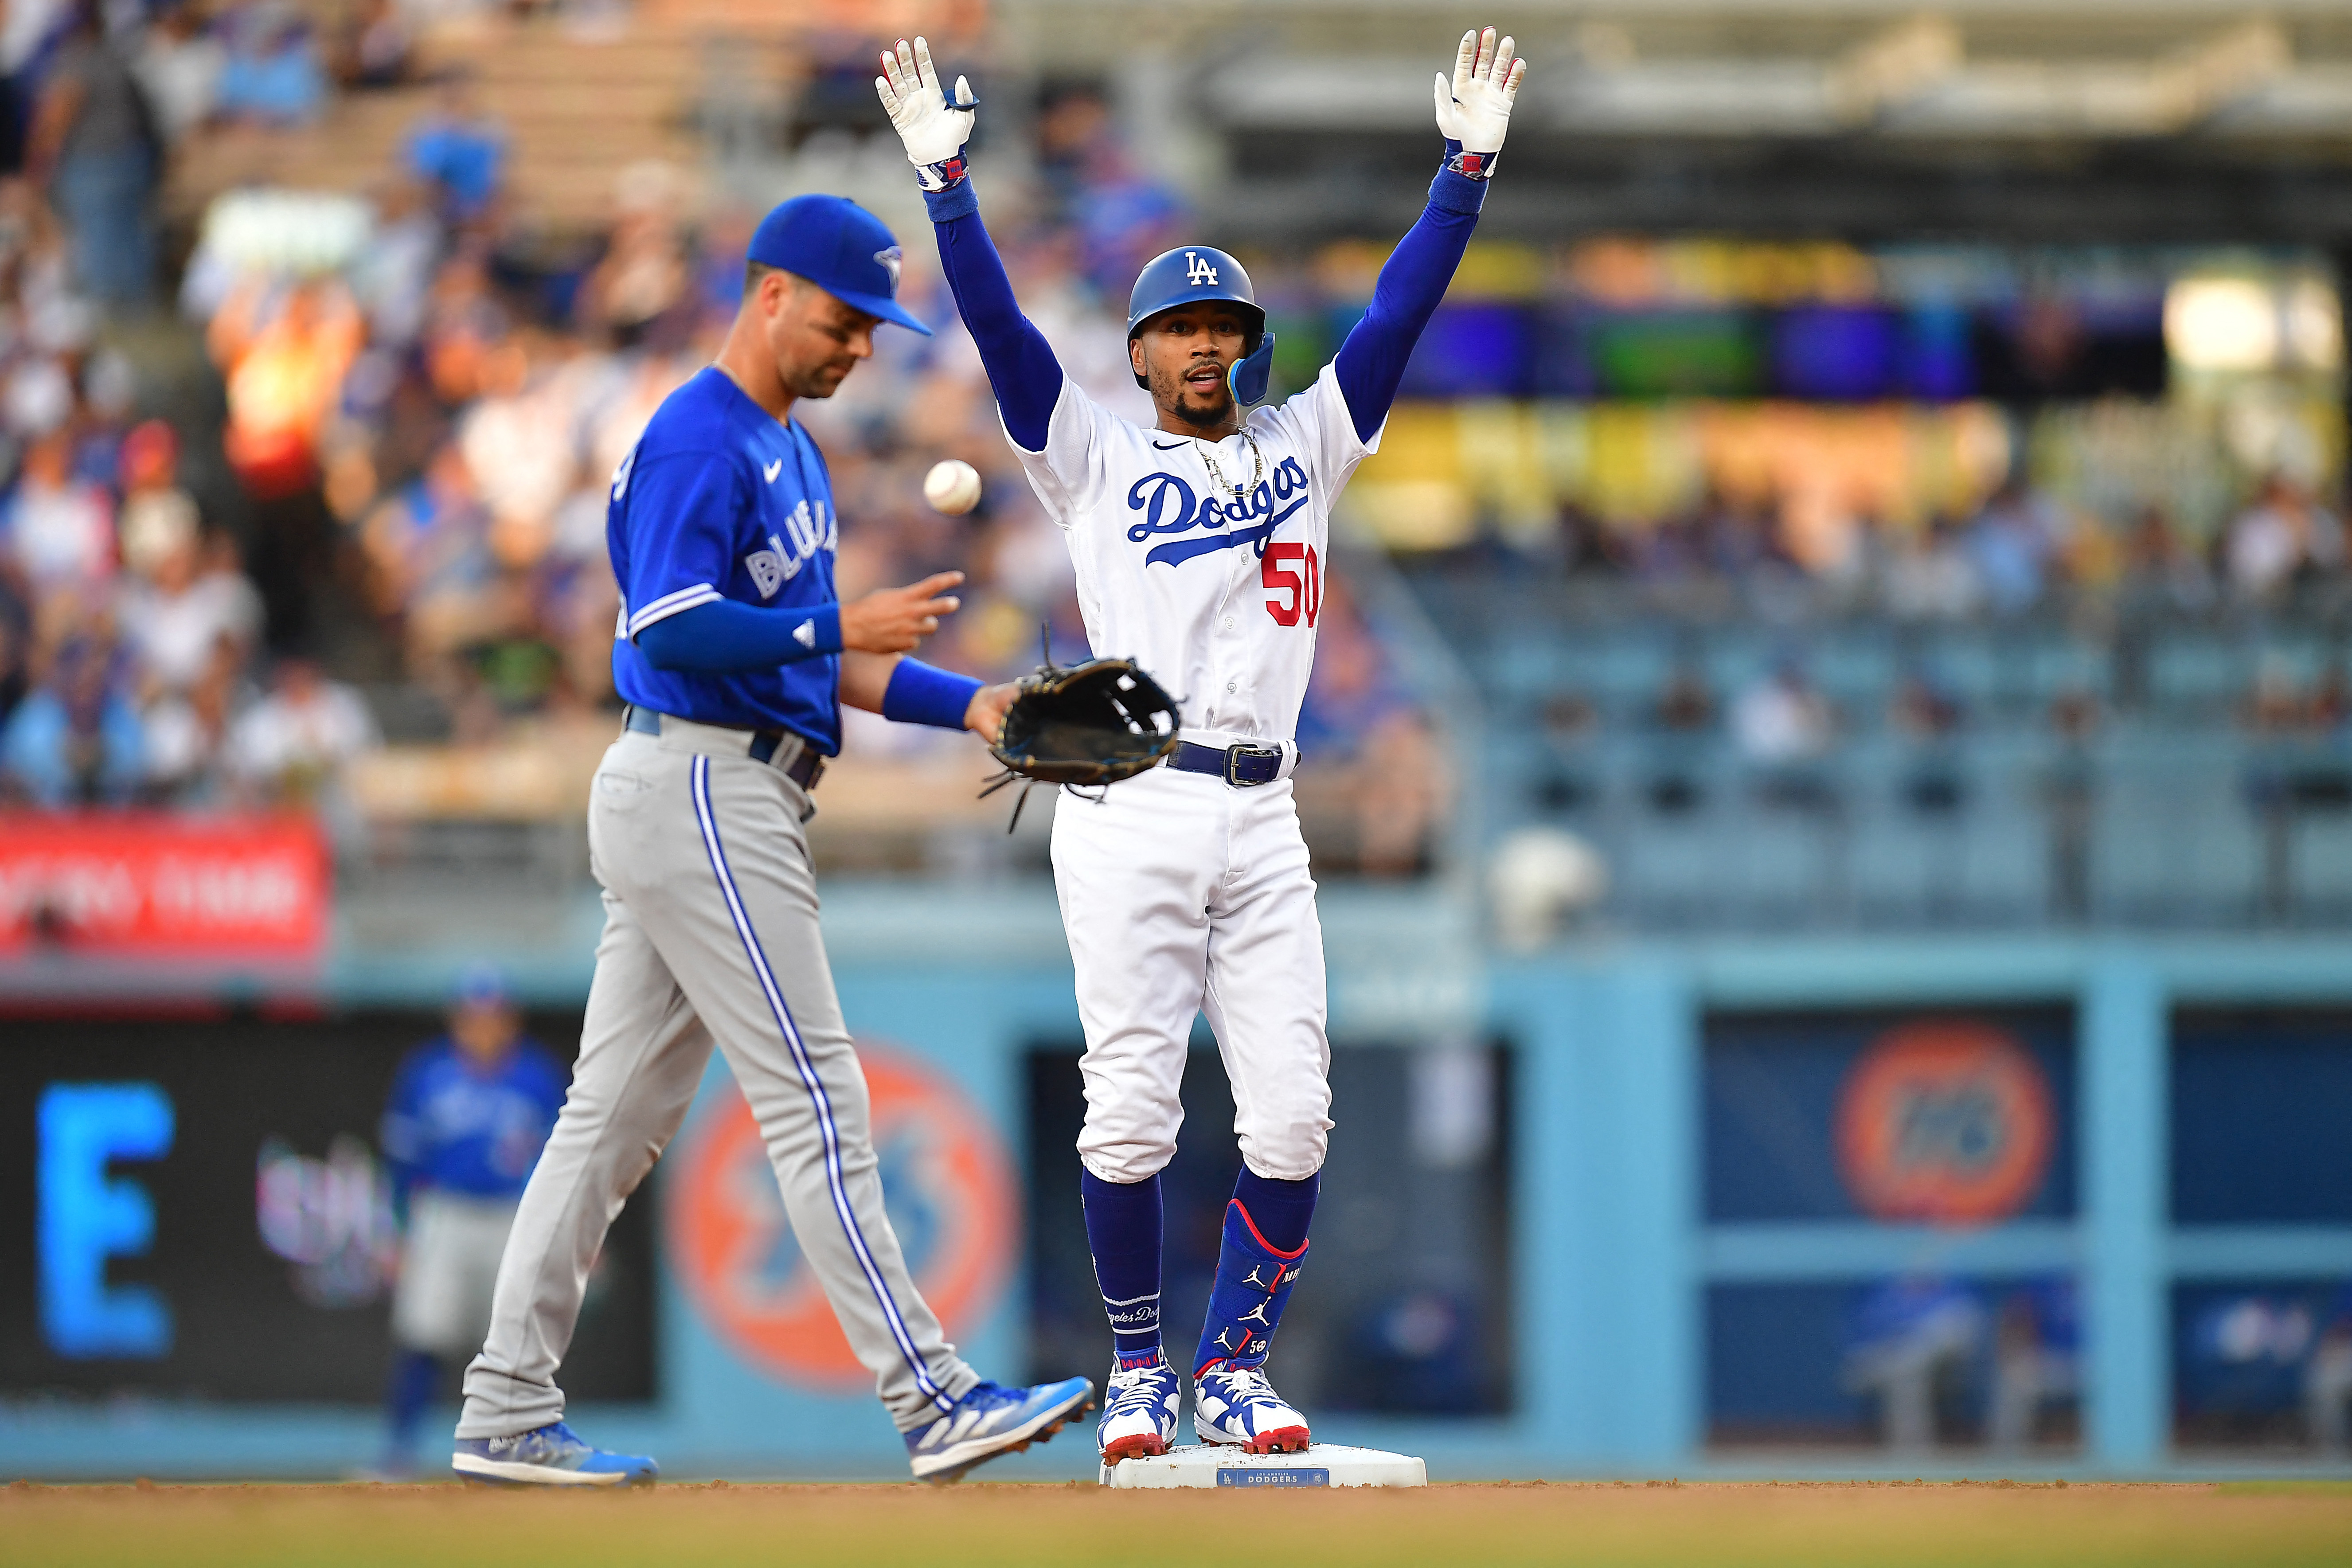 Dodgers Reveal Their Extensive All-Star Game Plans